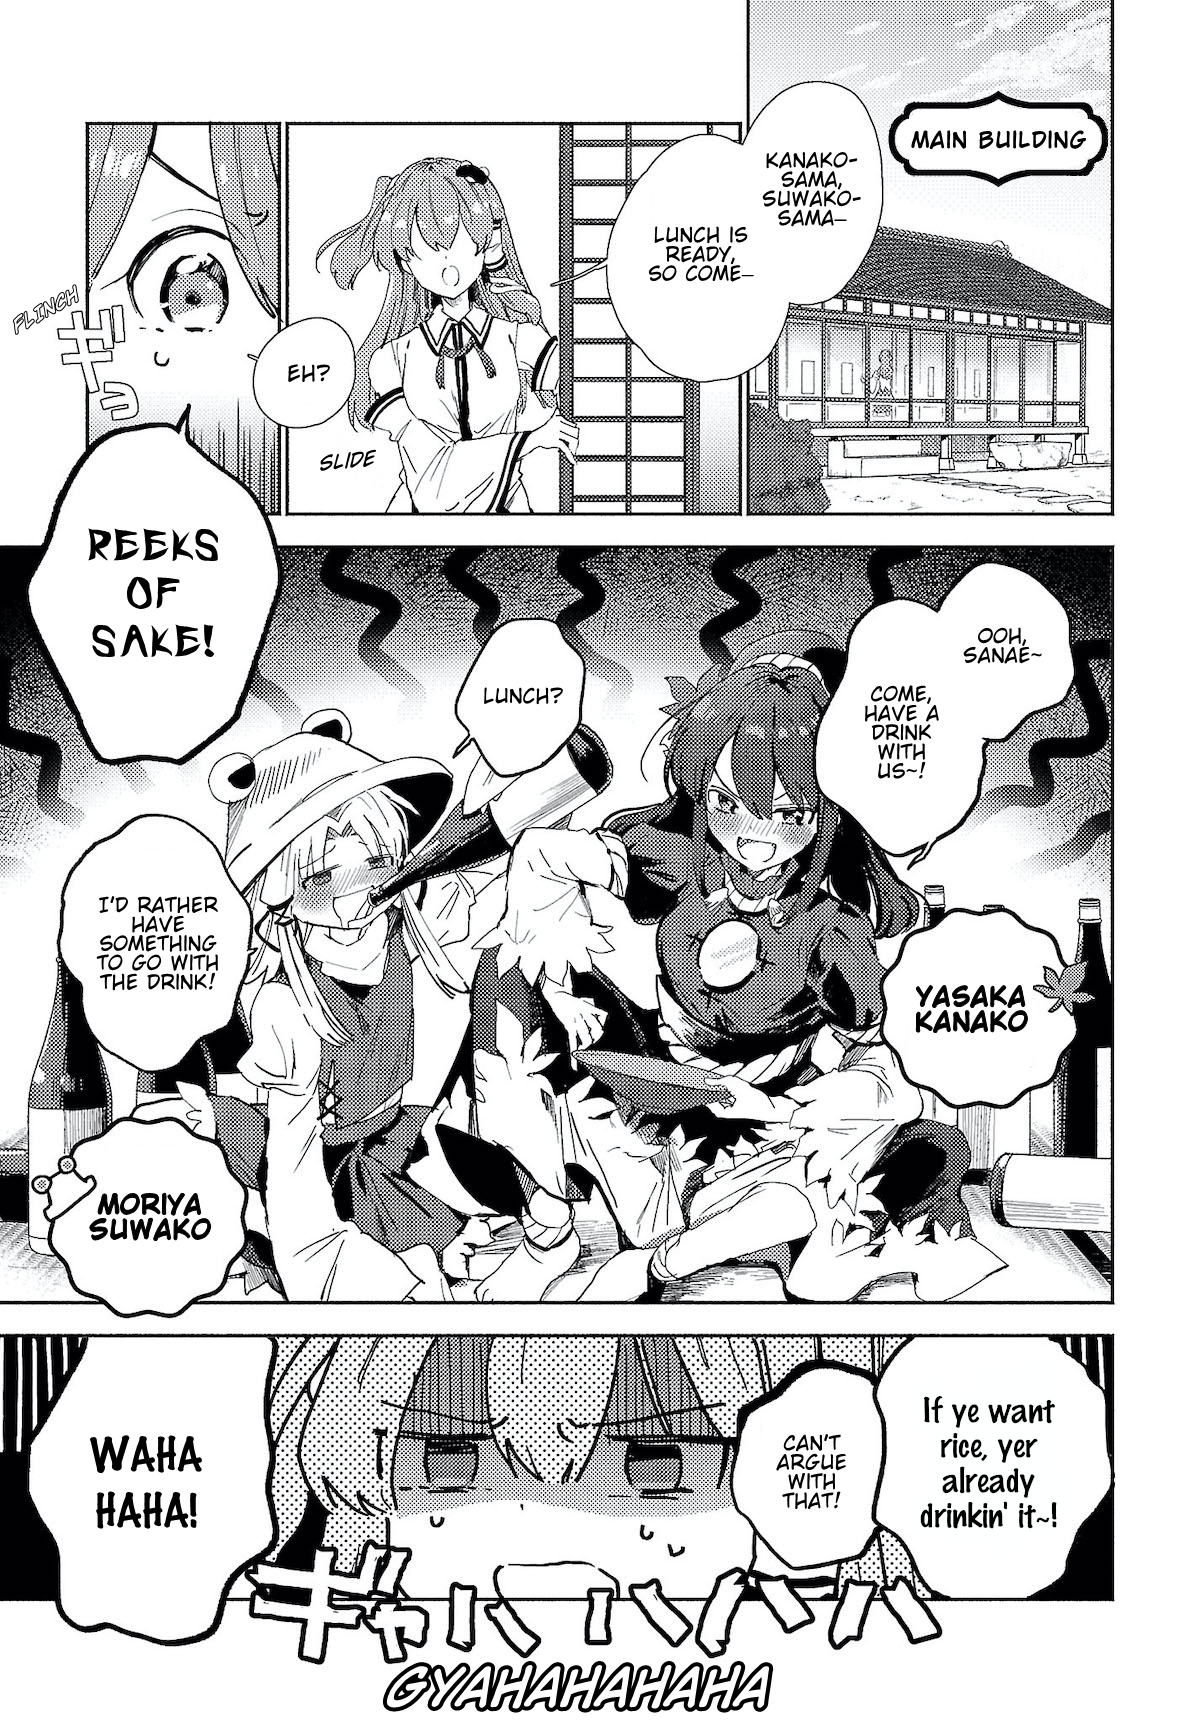 Touhou - Sanae-San Is On The Run! Chapter 1.1: Sanae-San Leaves Home - Picture 3